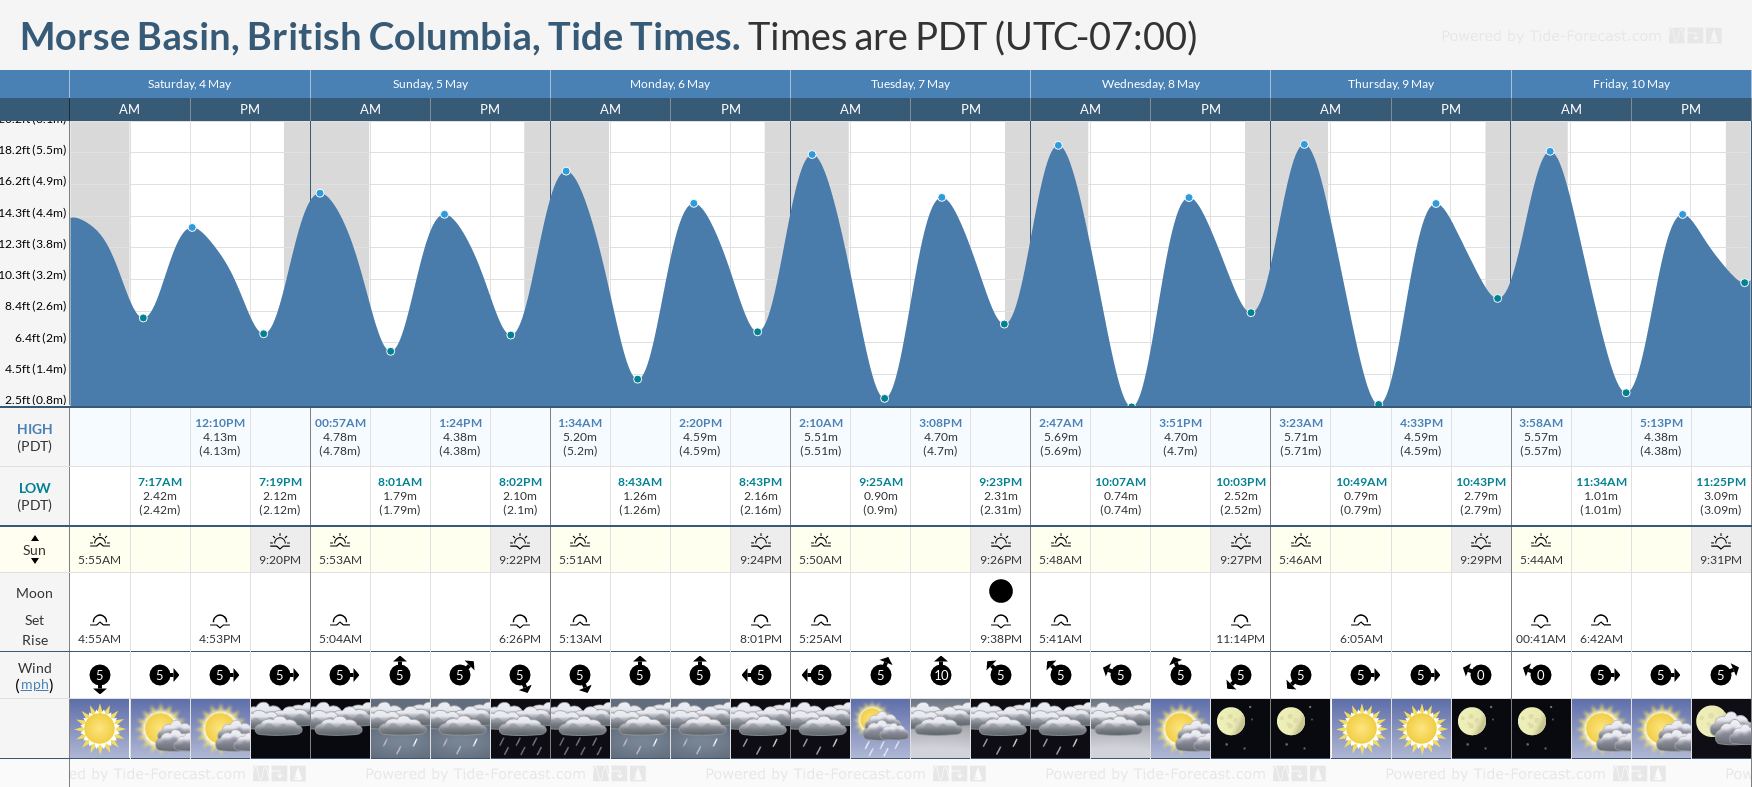 Morse Basin, British Columbia Tide Chart including high and low tide tide times for the next 7 days